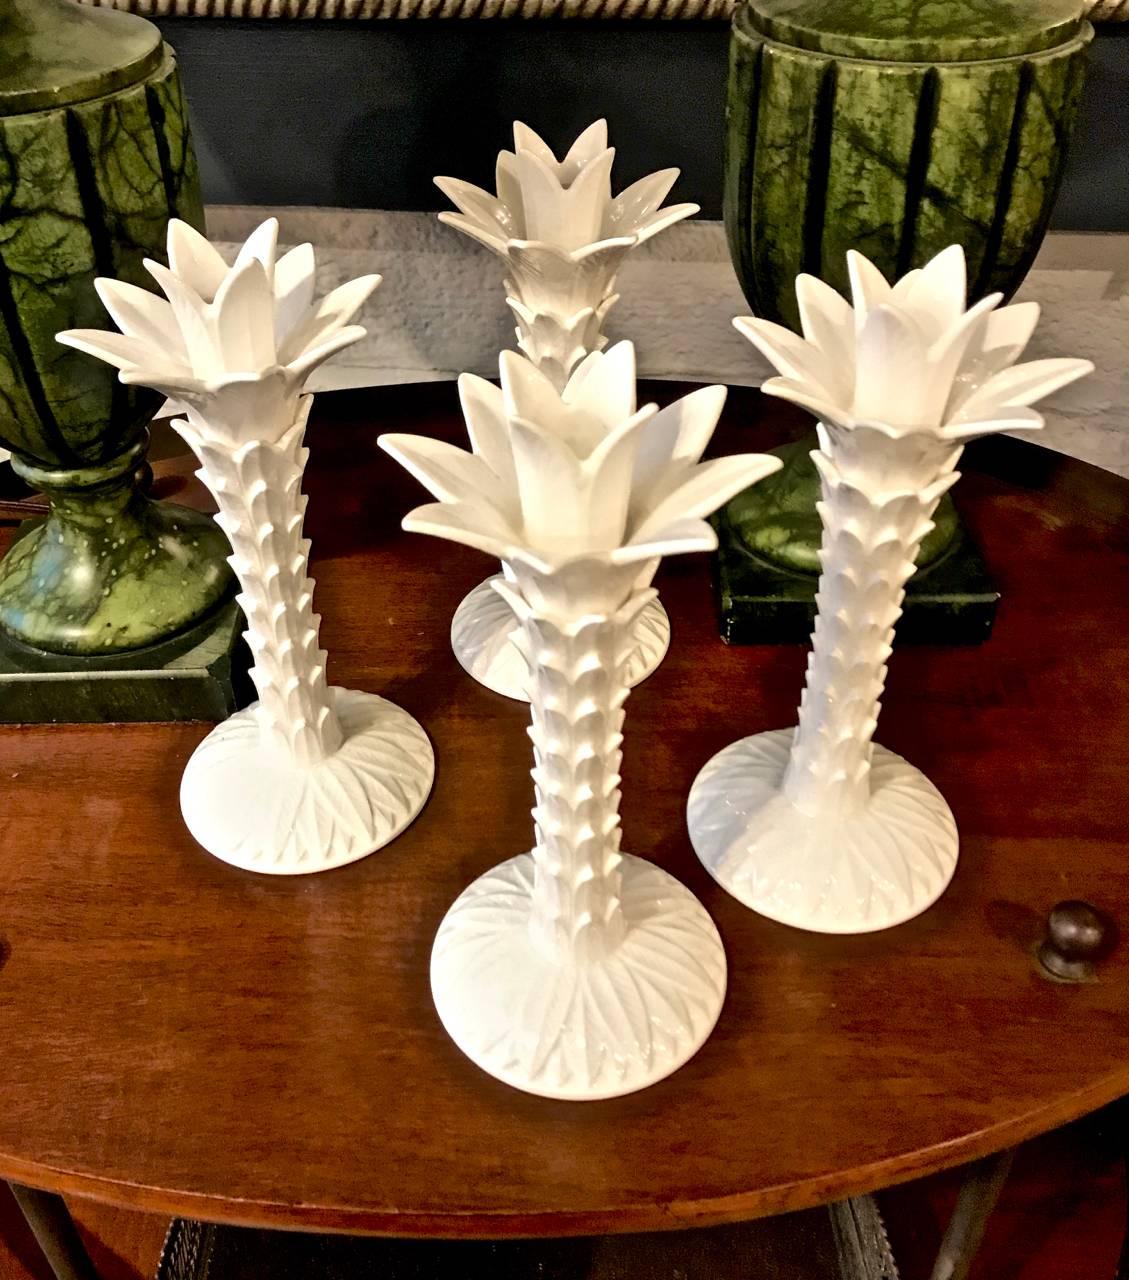 This a great set of four Fitz & Floyd pottery palm tree chinoiserie candlesticks in an ivory tone. The candlesticks are dated 1975. It is unusual to find a set of four of these highly decorative candlesticks.